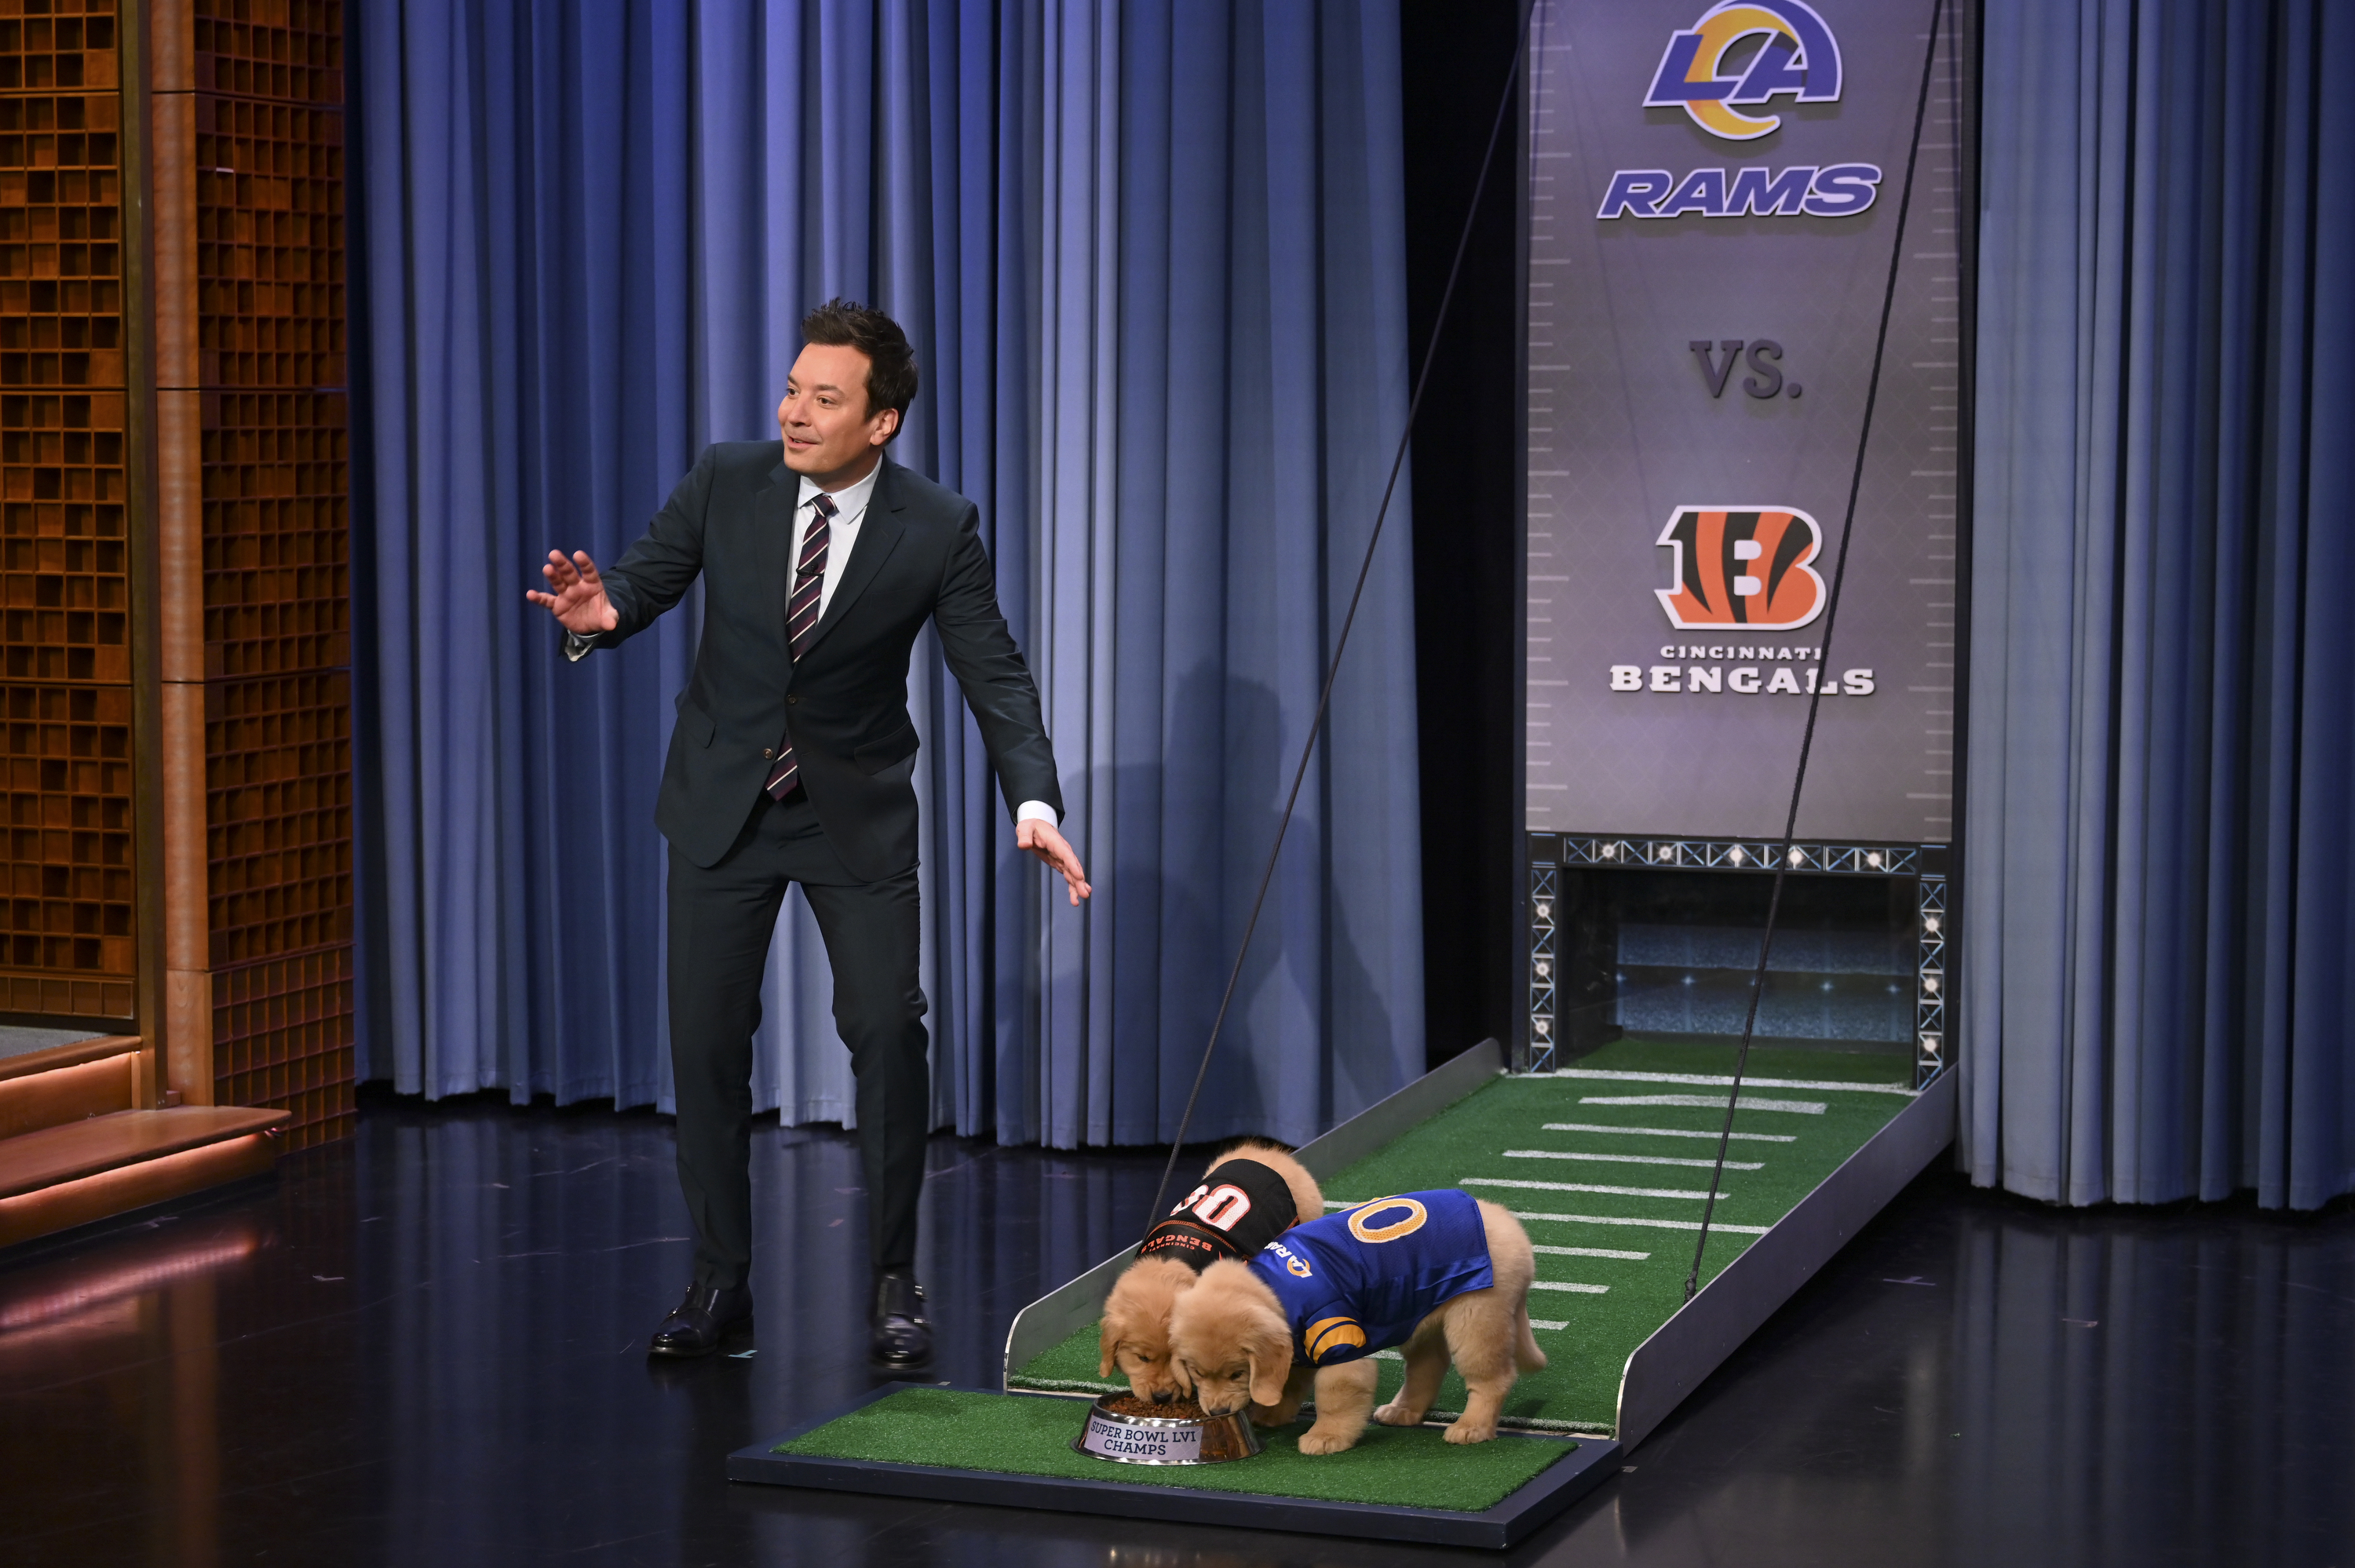 THE TONIGHT SHOW STARRING JIMMY FALLON — Episode 1595 — Pictured: Host Jimmy Fallon during Puppy Predictors: Super Bowl 56 on Monday, January 31, 2022 —